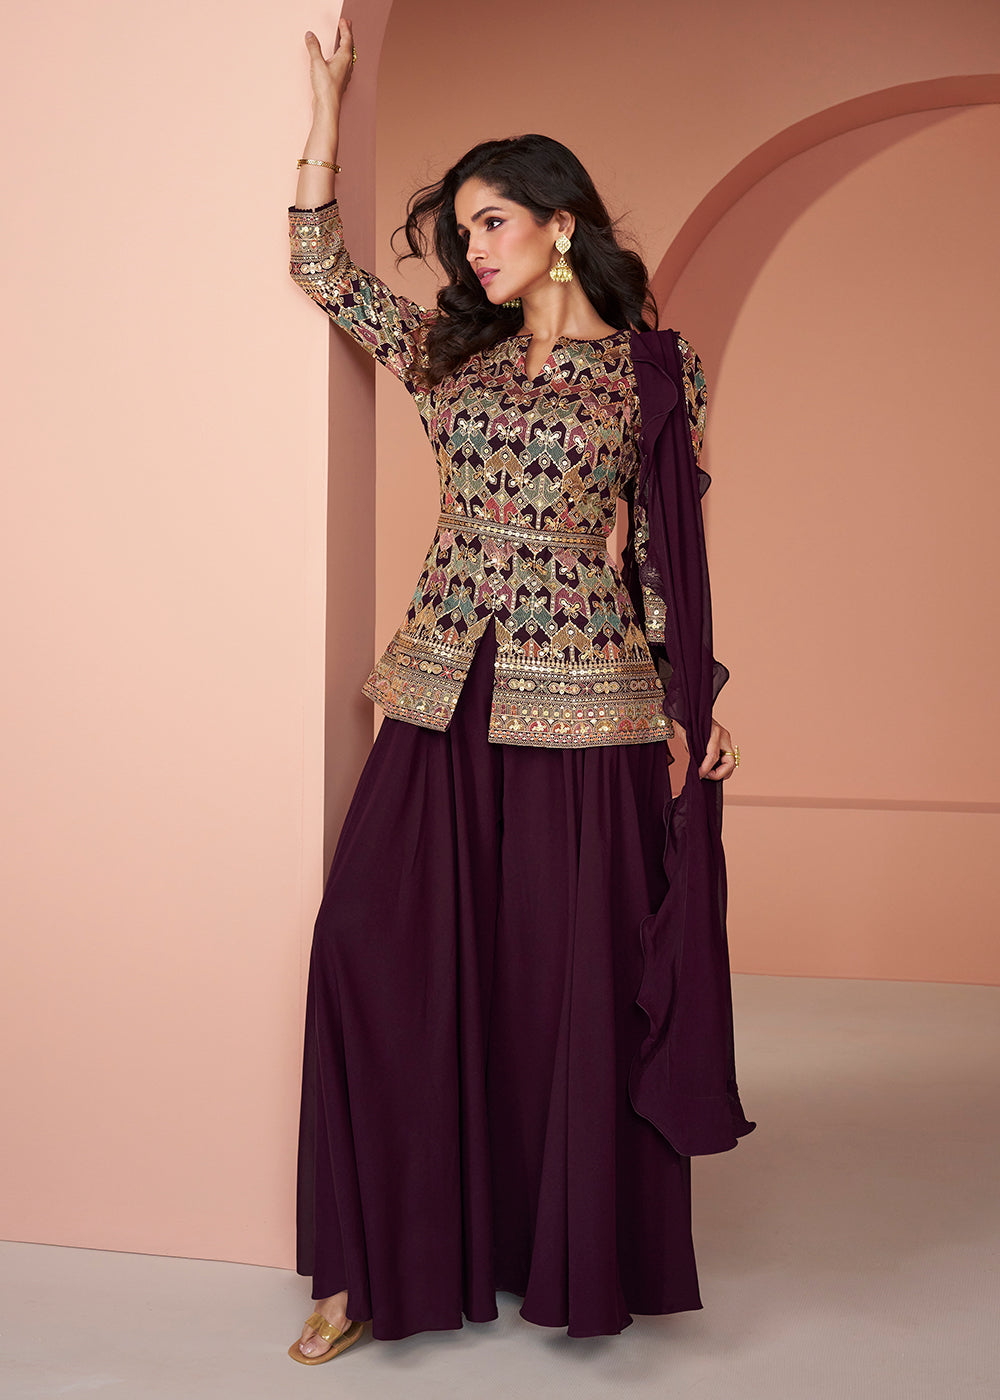 Buy Now Multi Wine Embroidered Georgette Indo Western Palazzo Suit Online in USA, UK, Canada, Germany, Australia & Worldwide at Empress Clothing. 